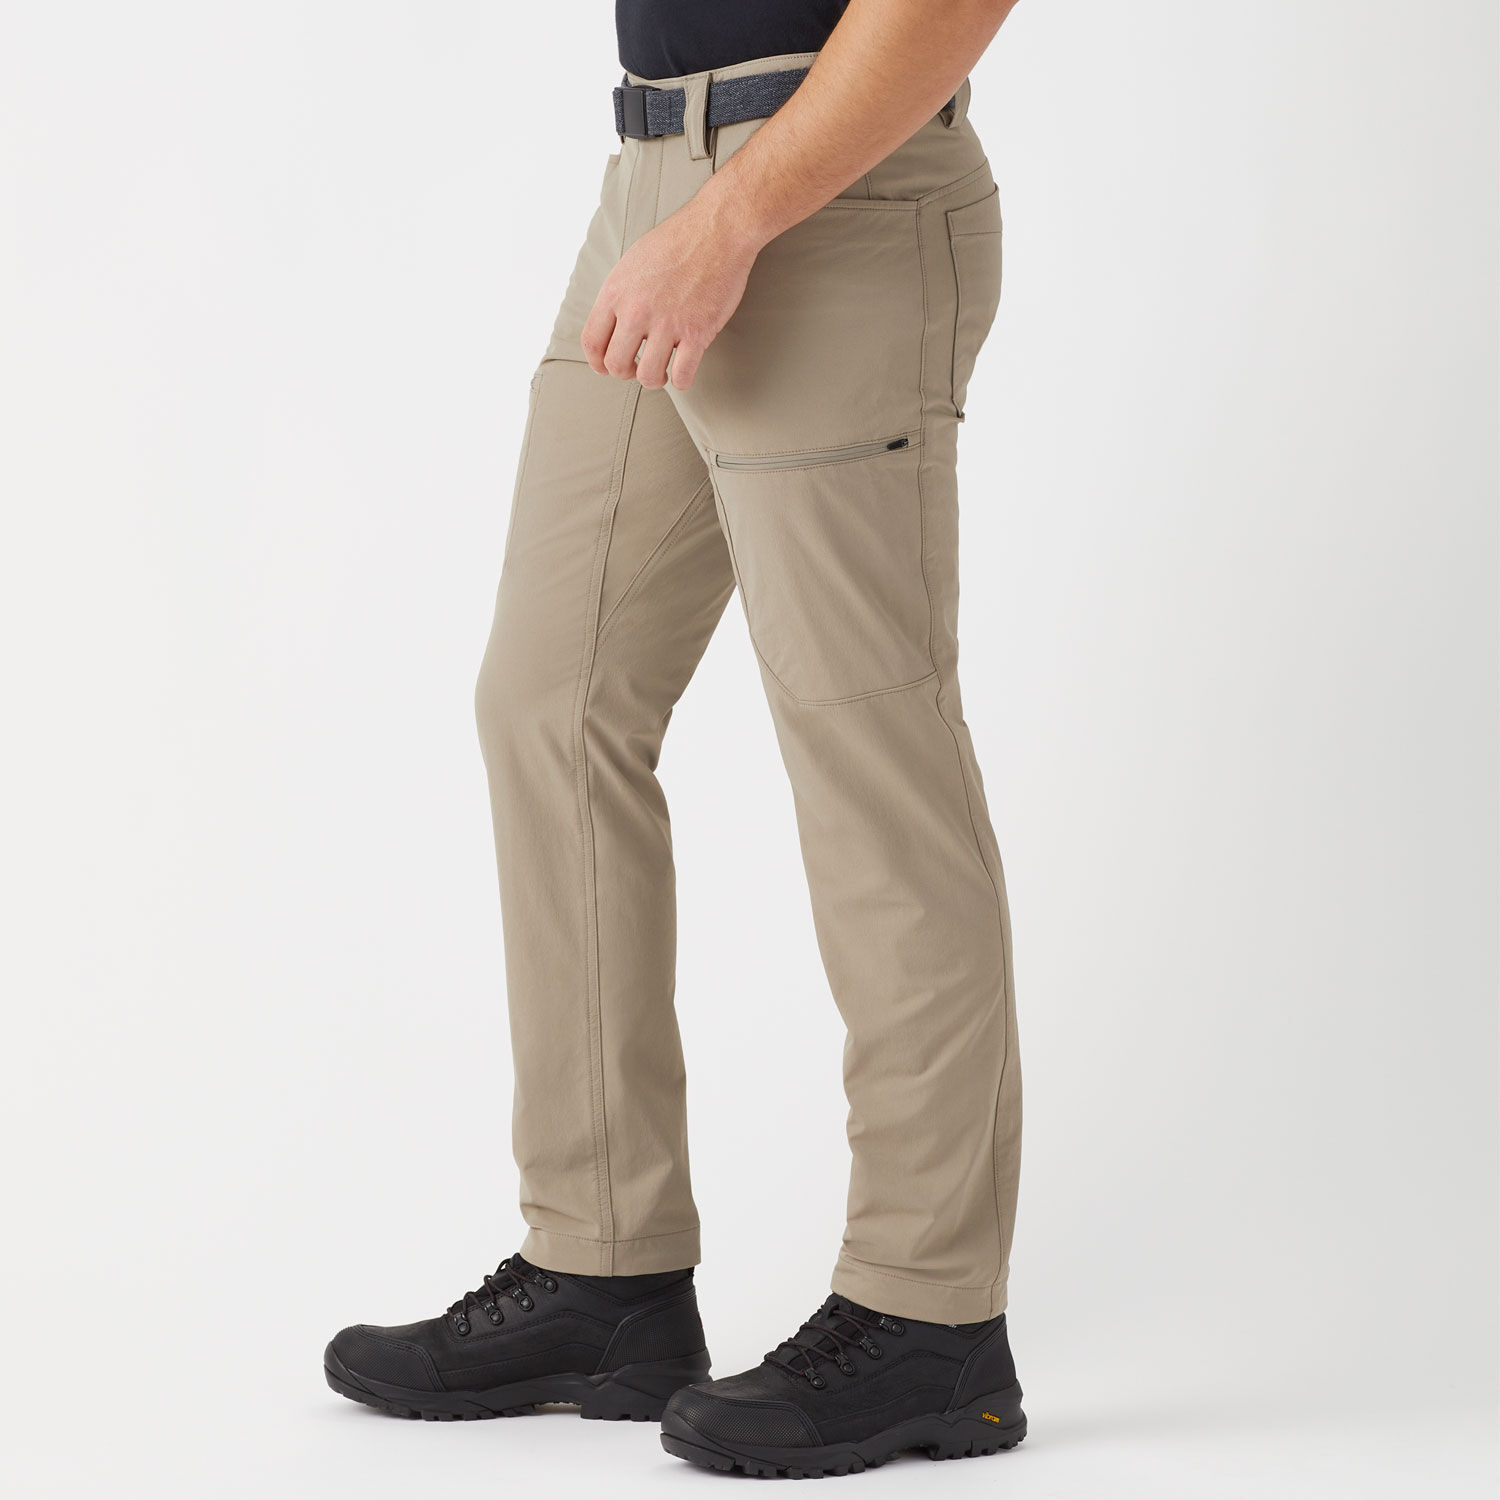 American Eagle Outfitters Cargo Pants for Men for sale | eBay